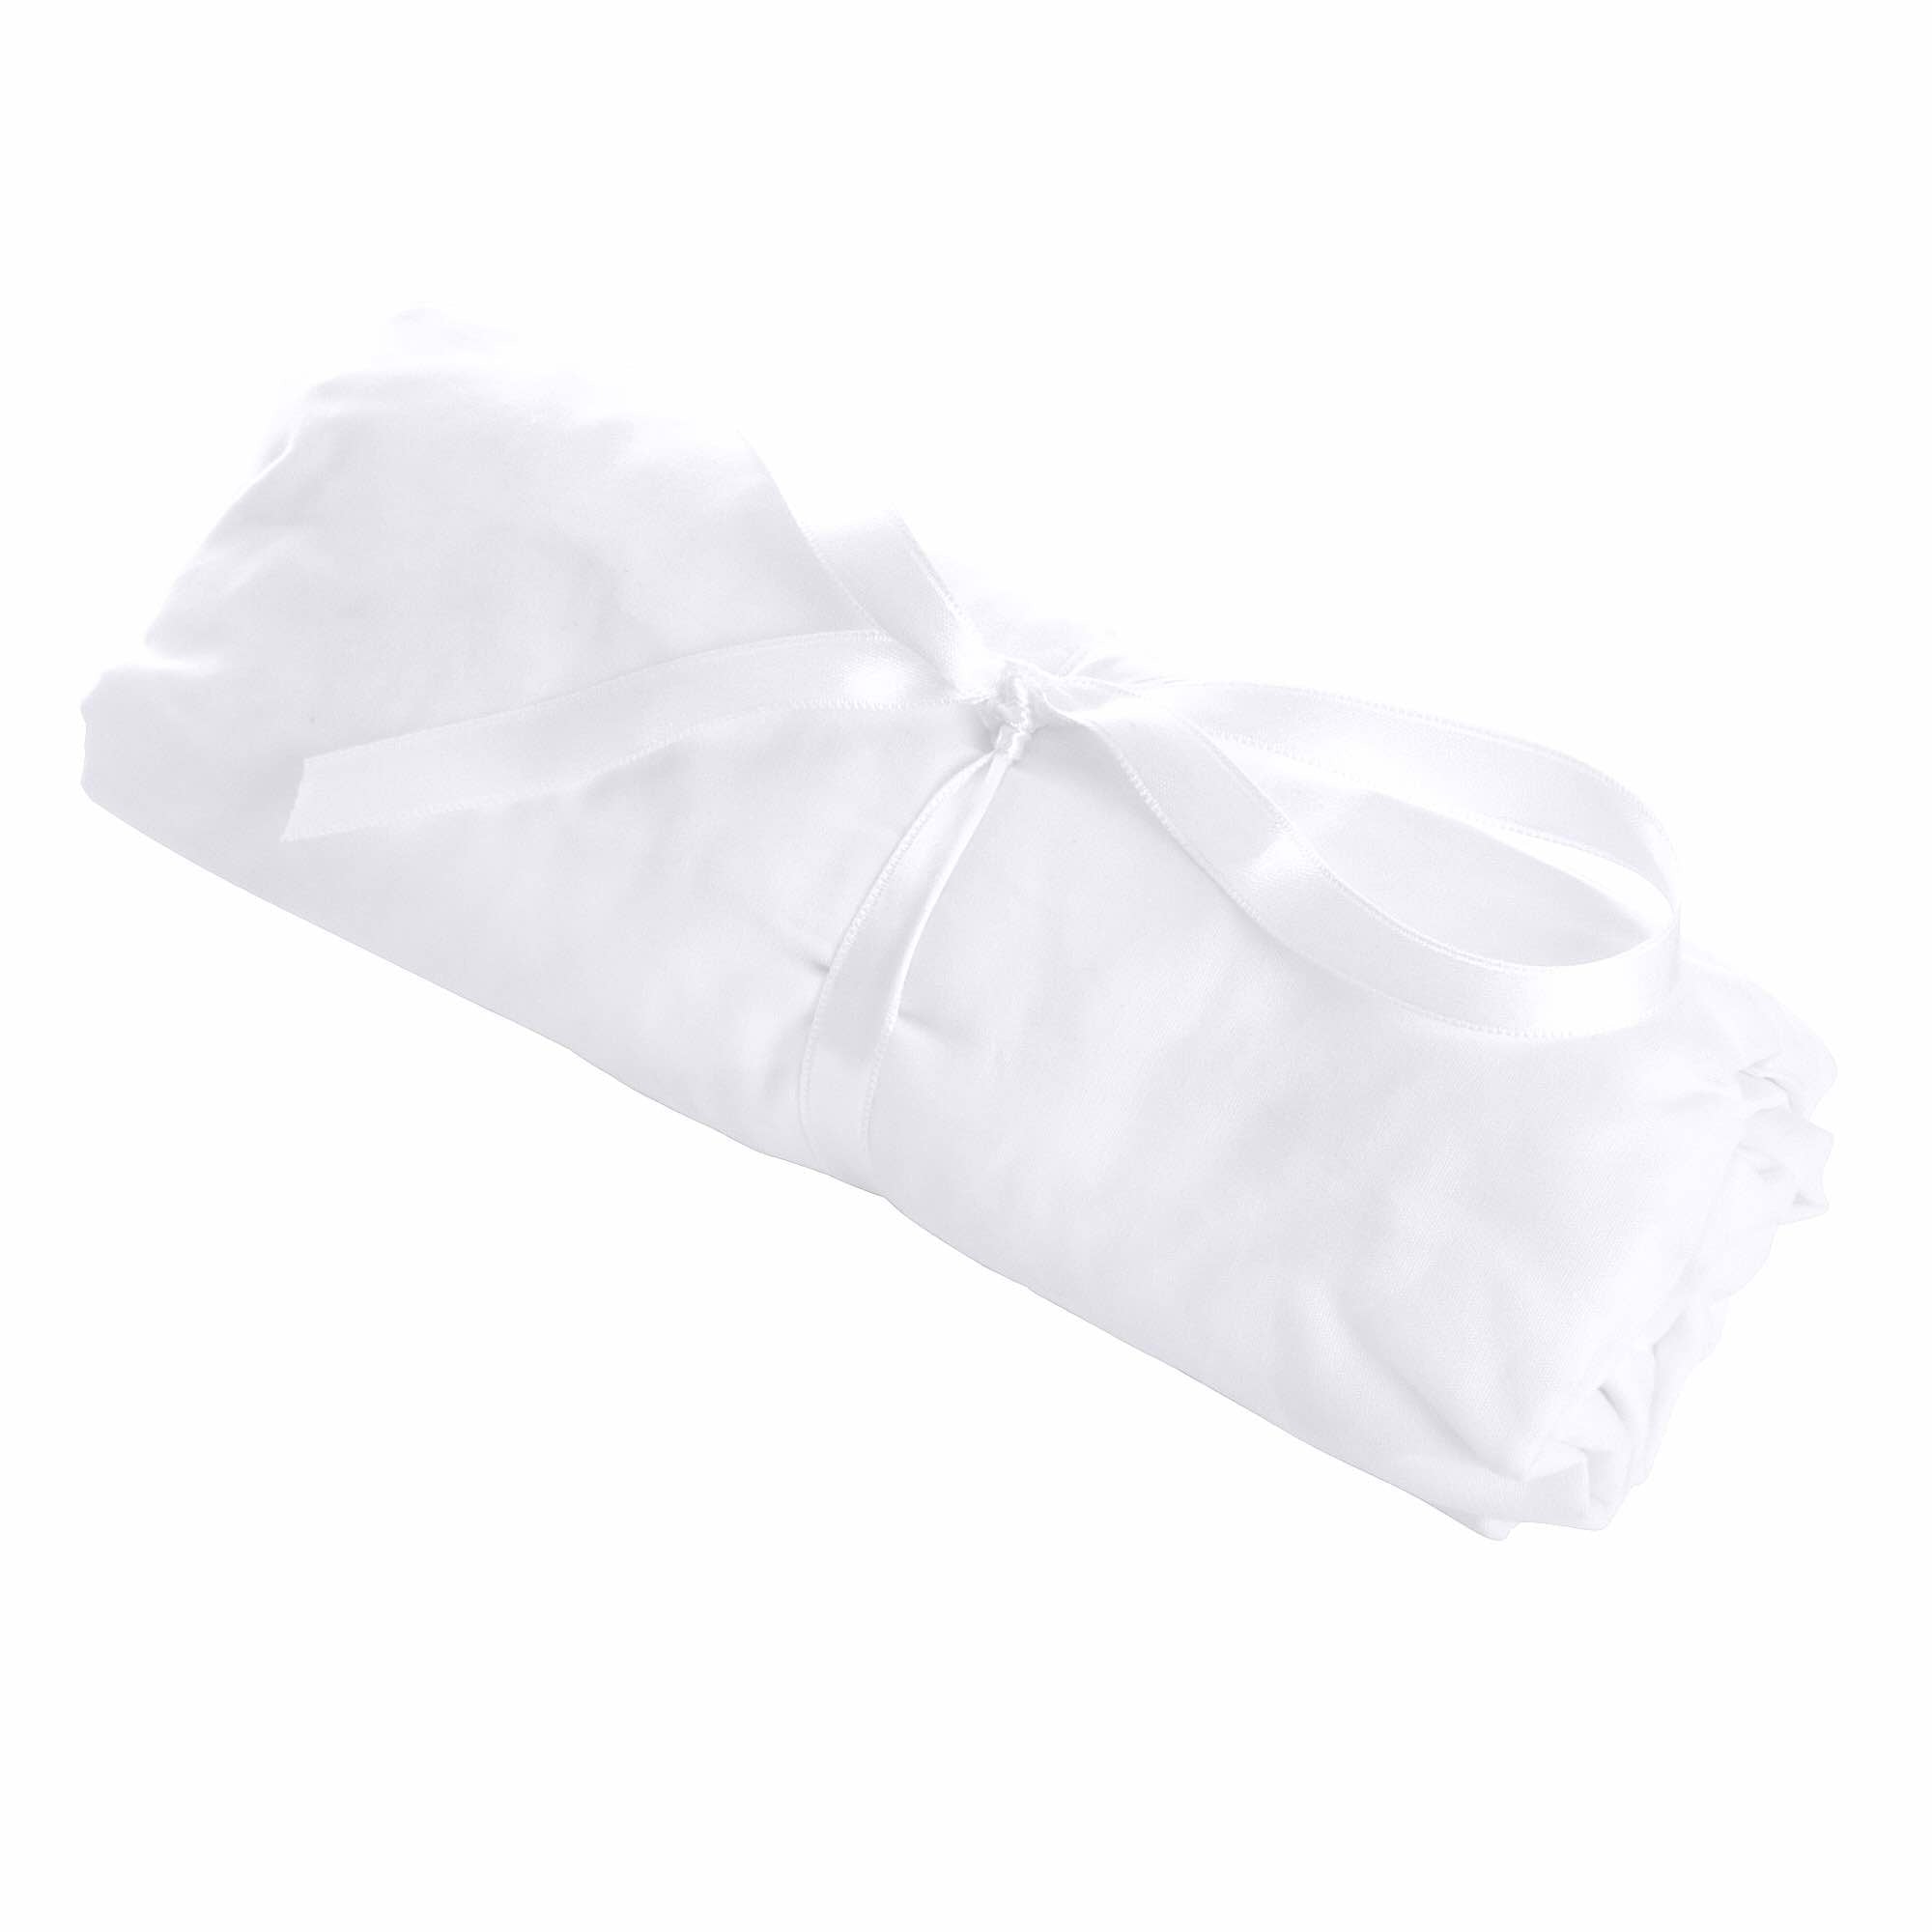 Theophile & Patachou Cot Bed Fitted Sheet 60x120 - Royal White